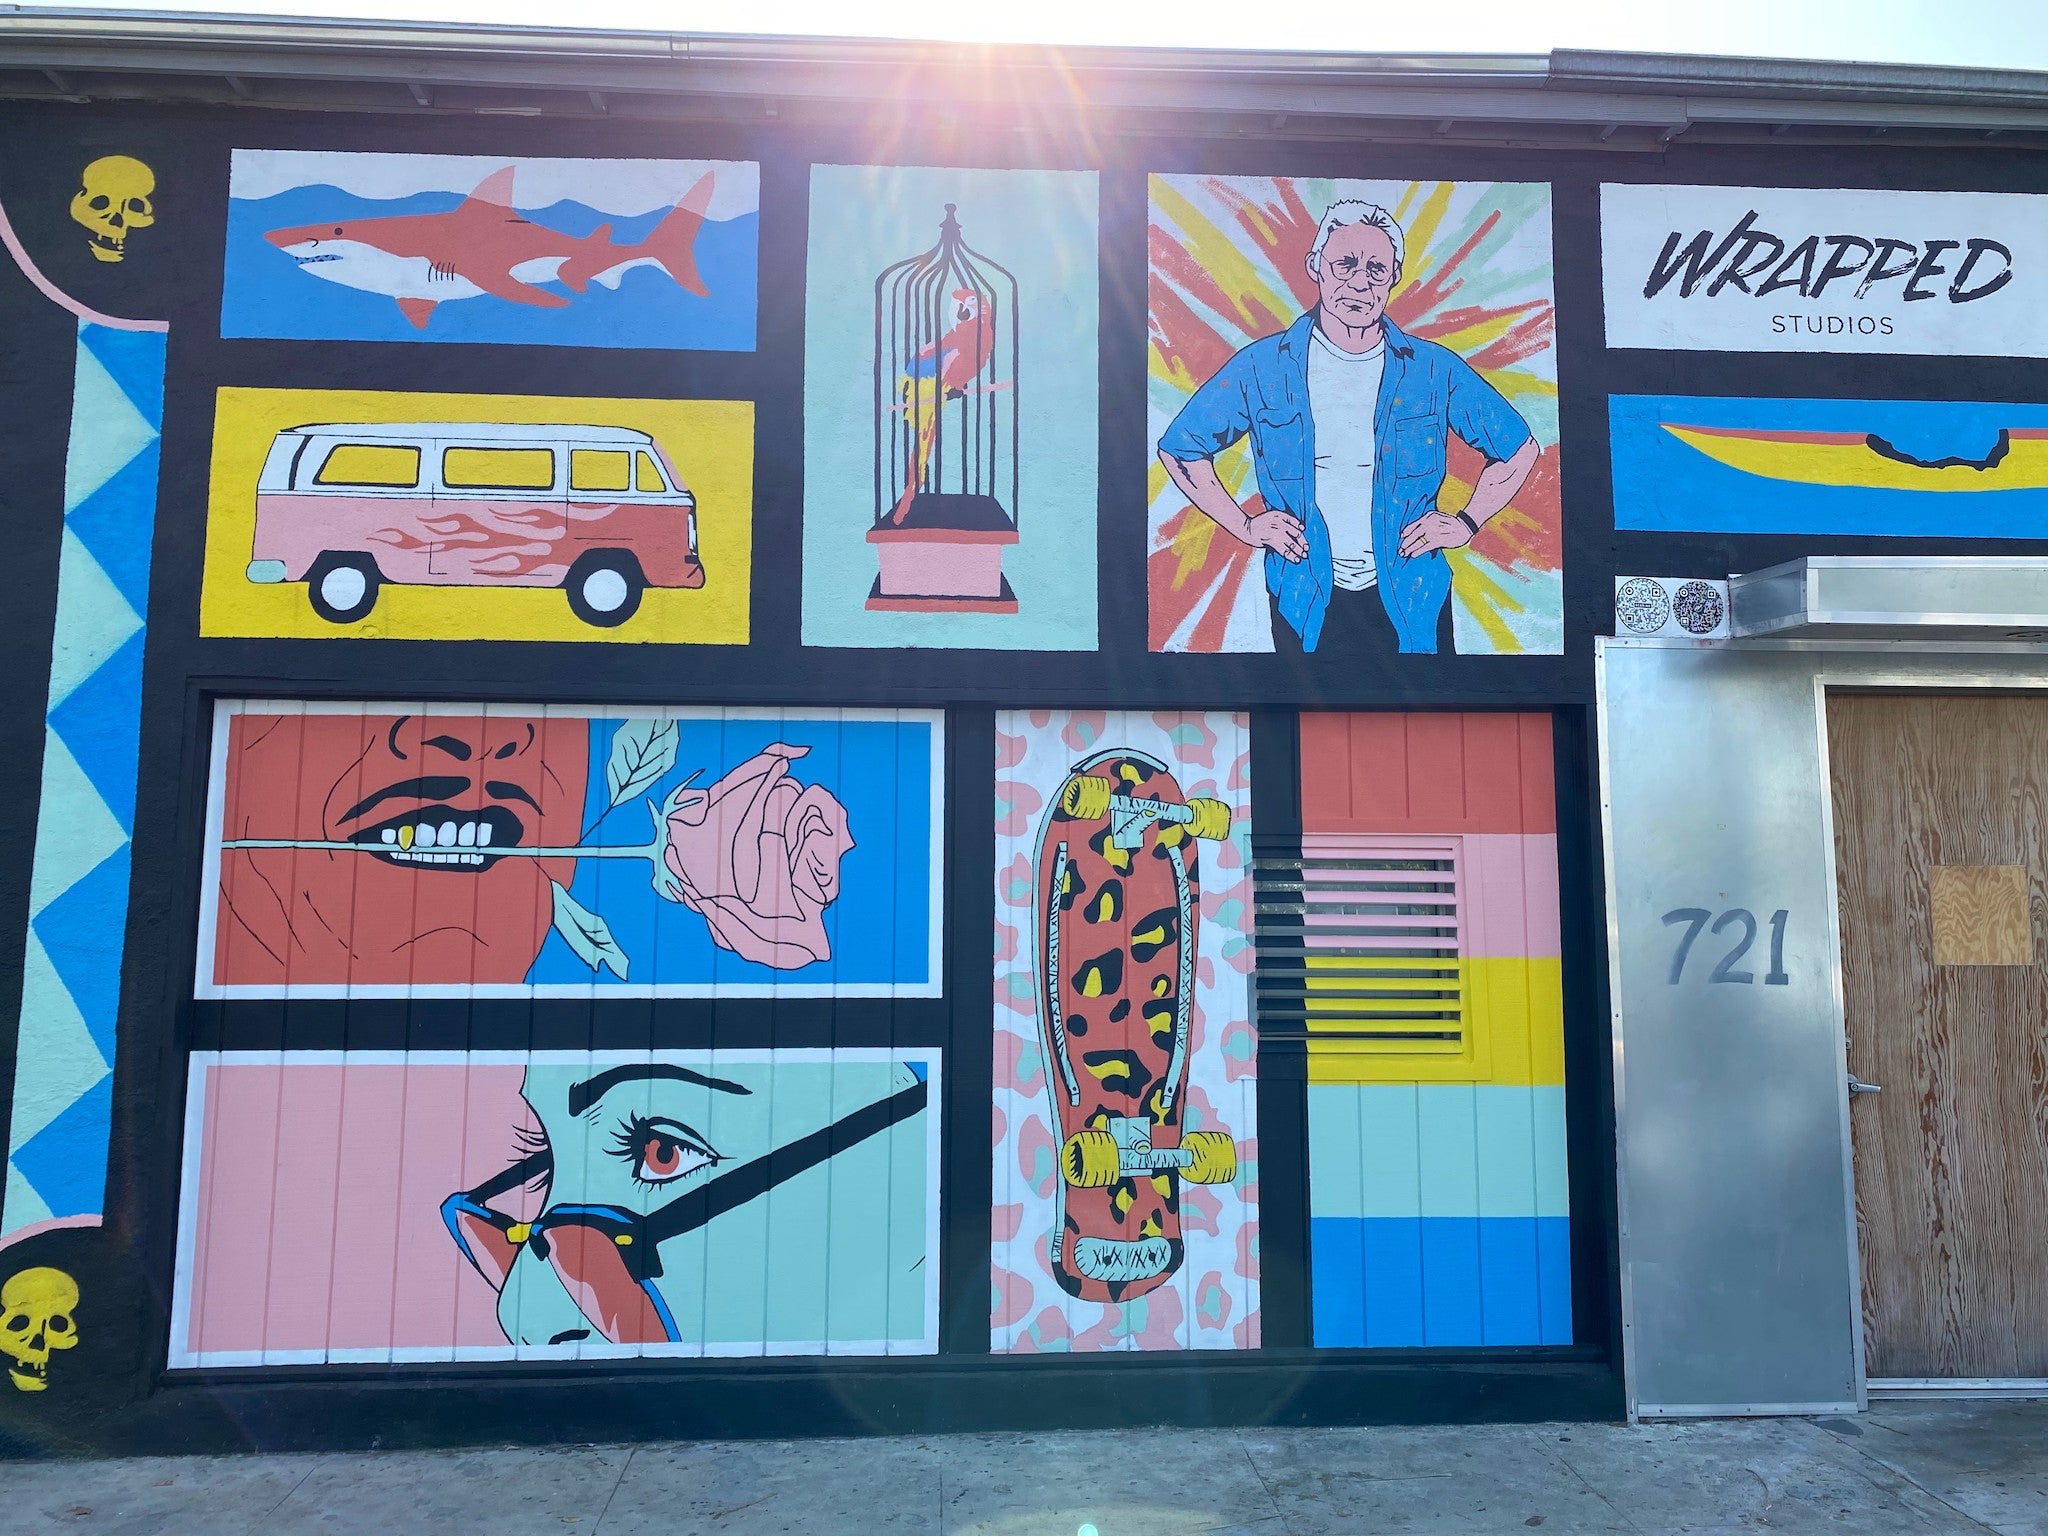 WRAPPED Studio's mural at Arnoldi's studio capturing Venice's skateboarding legacy and beach culture, featuring a shark and a vibrant skateboard design.